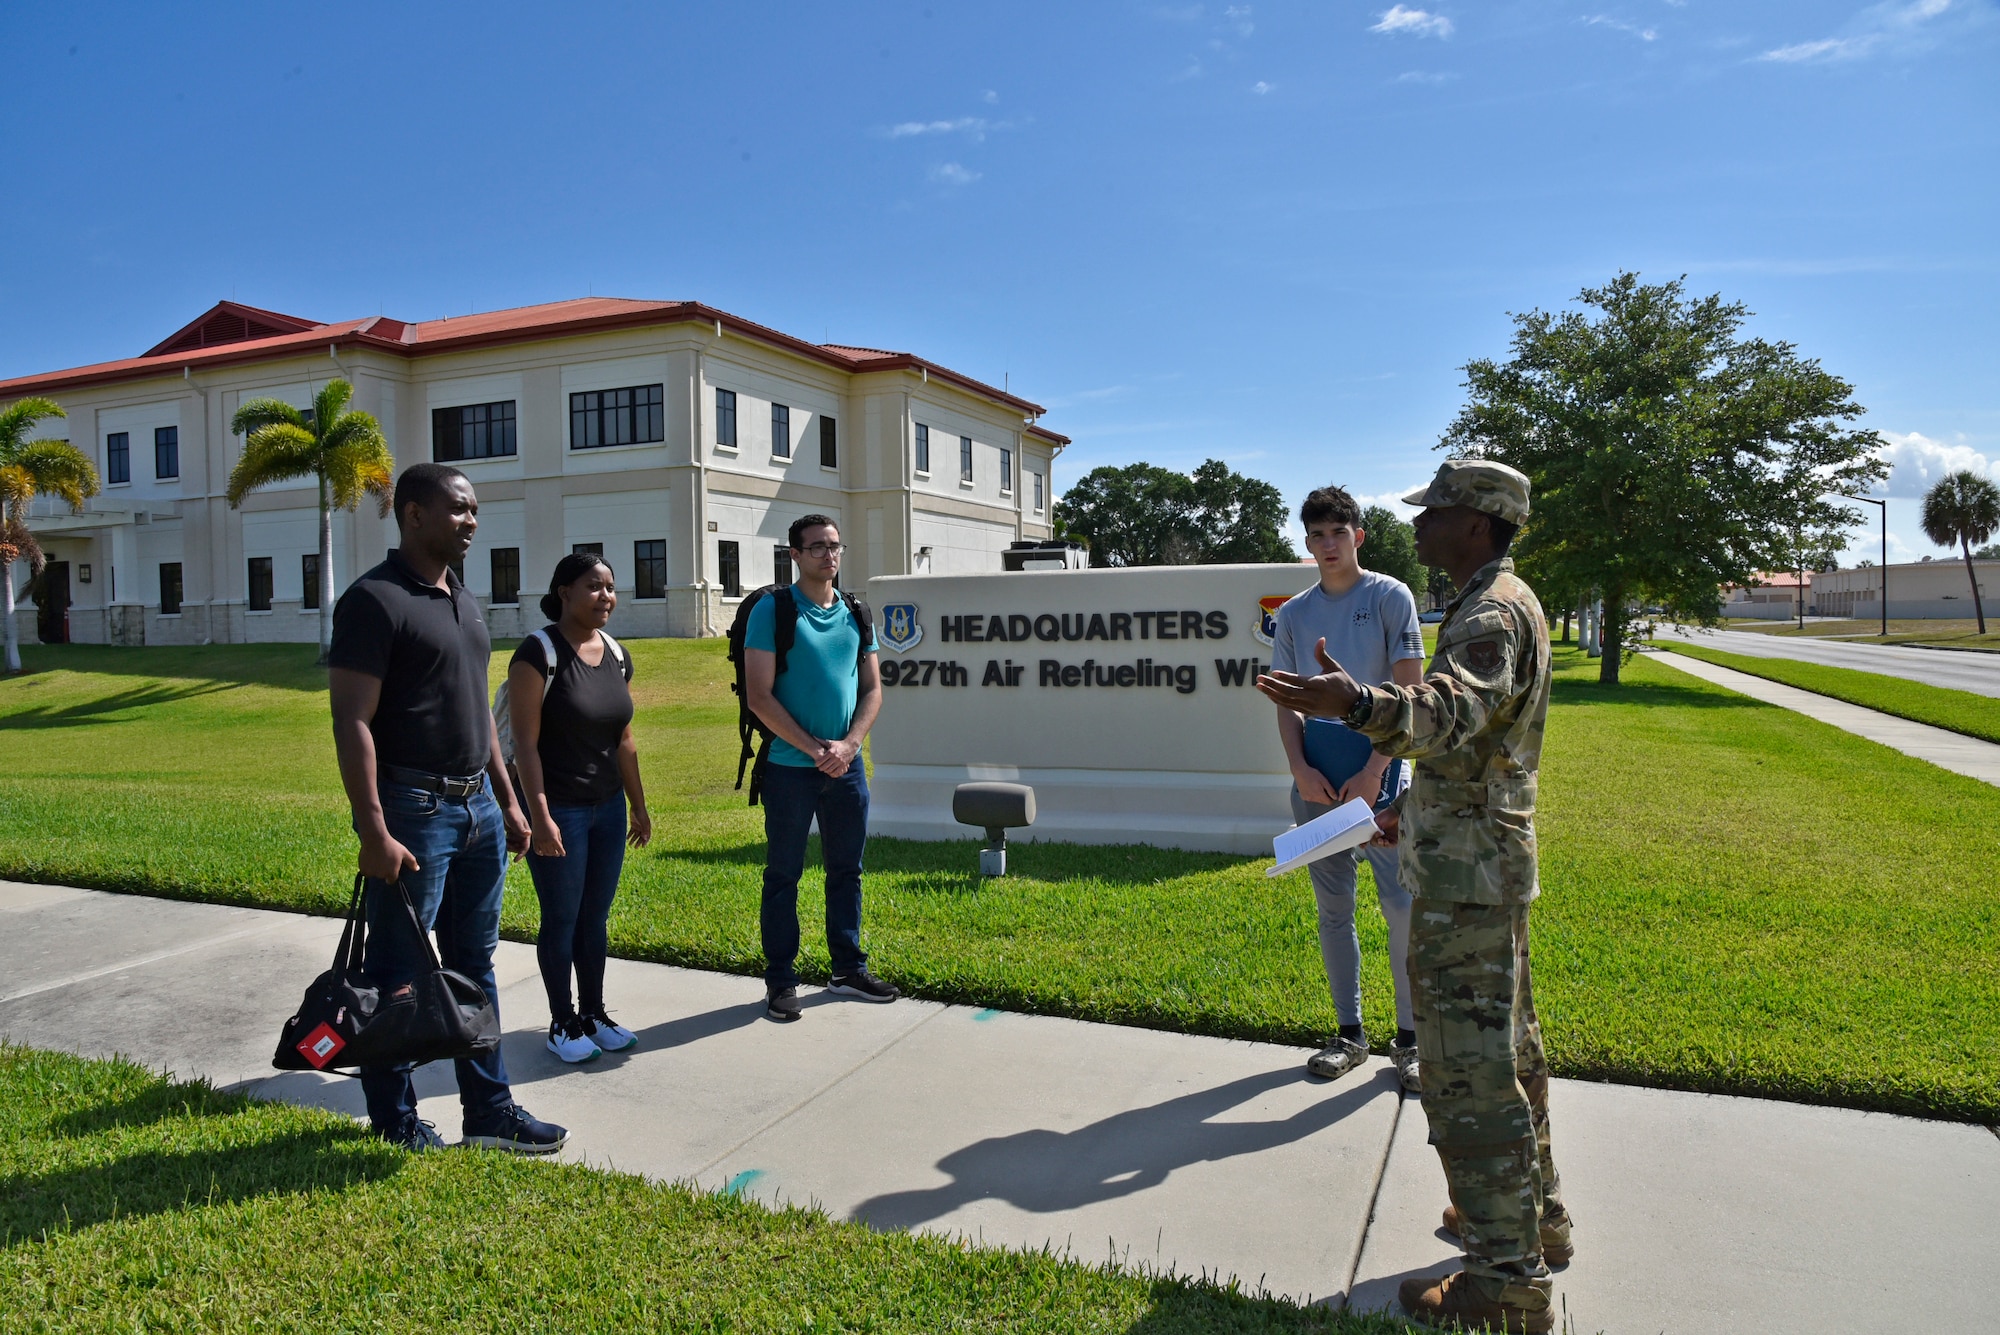 On 24 March, 2020 Staff Sgt. Dejaniee Hutchinson, 927th Developmental Training Fight facilitator, MacDill AFB, Fl., delivered final travel and Basic Military Training reporting instructions to four future 927th Air Refueling Wing Airmen. (U.S. Air Force photo by Tech. Sgt. Peter Dean)